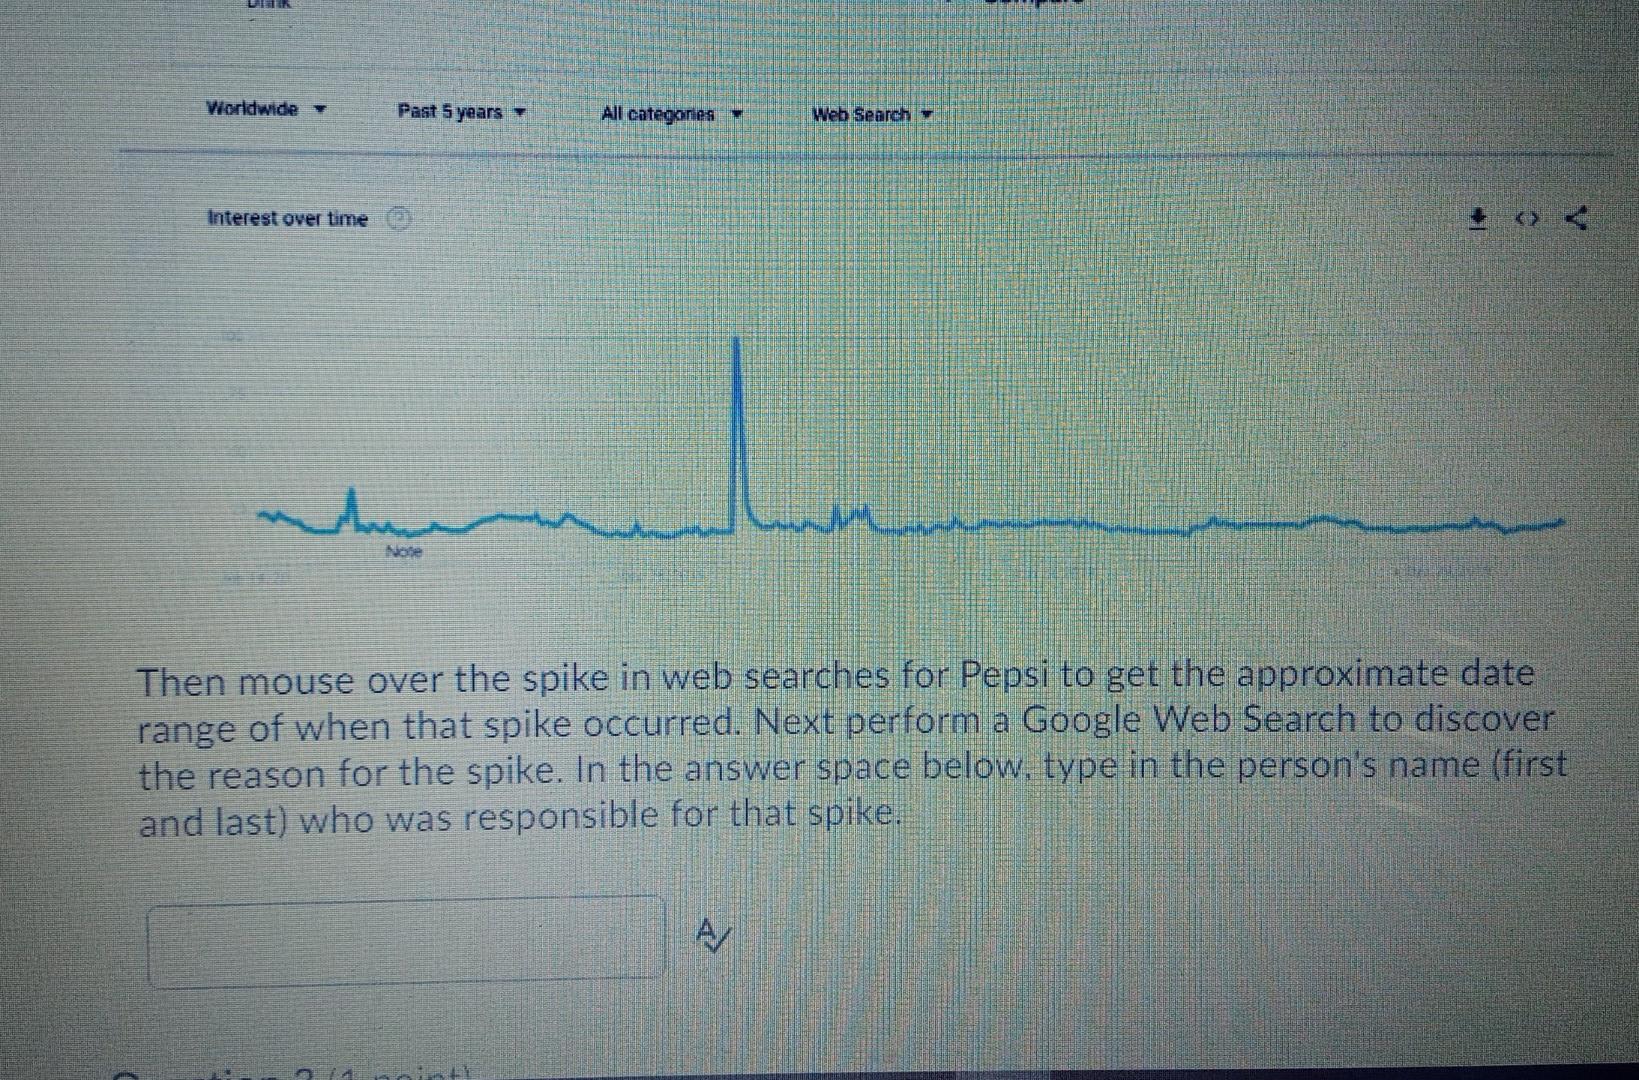 I noticed there was a spike in search trends for Chutzpah after